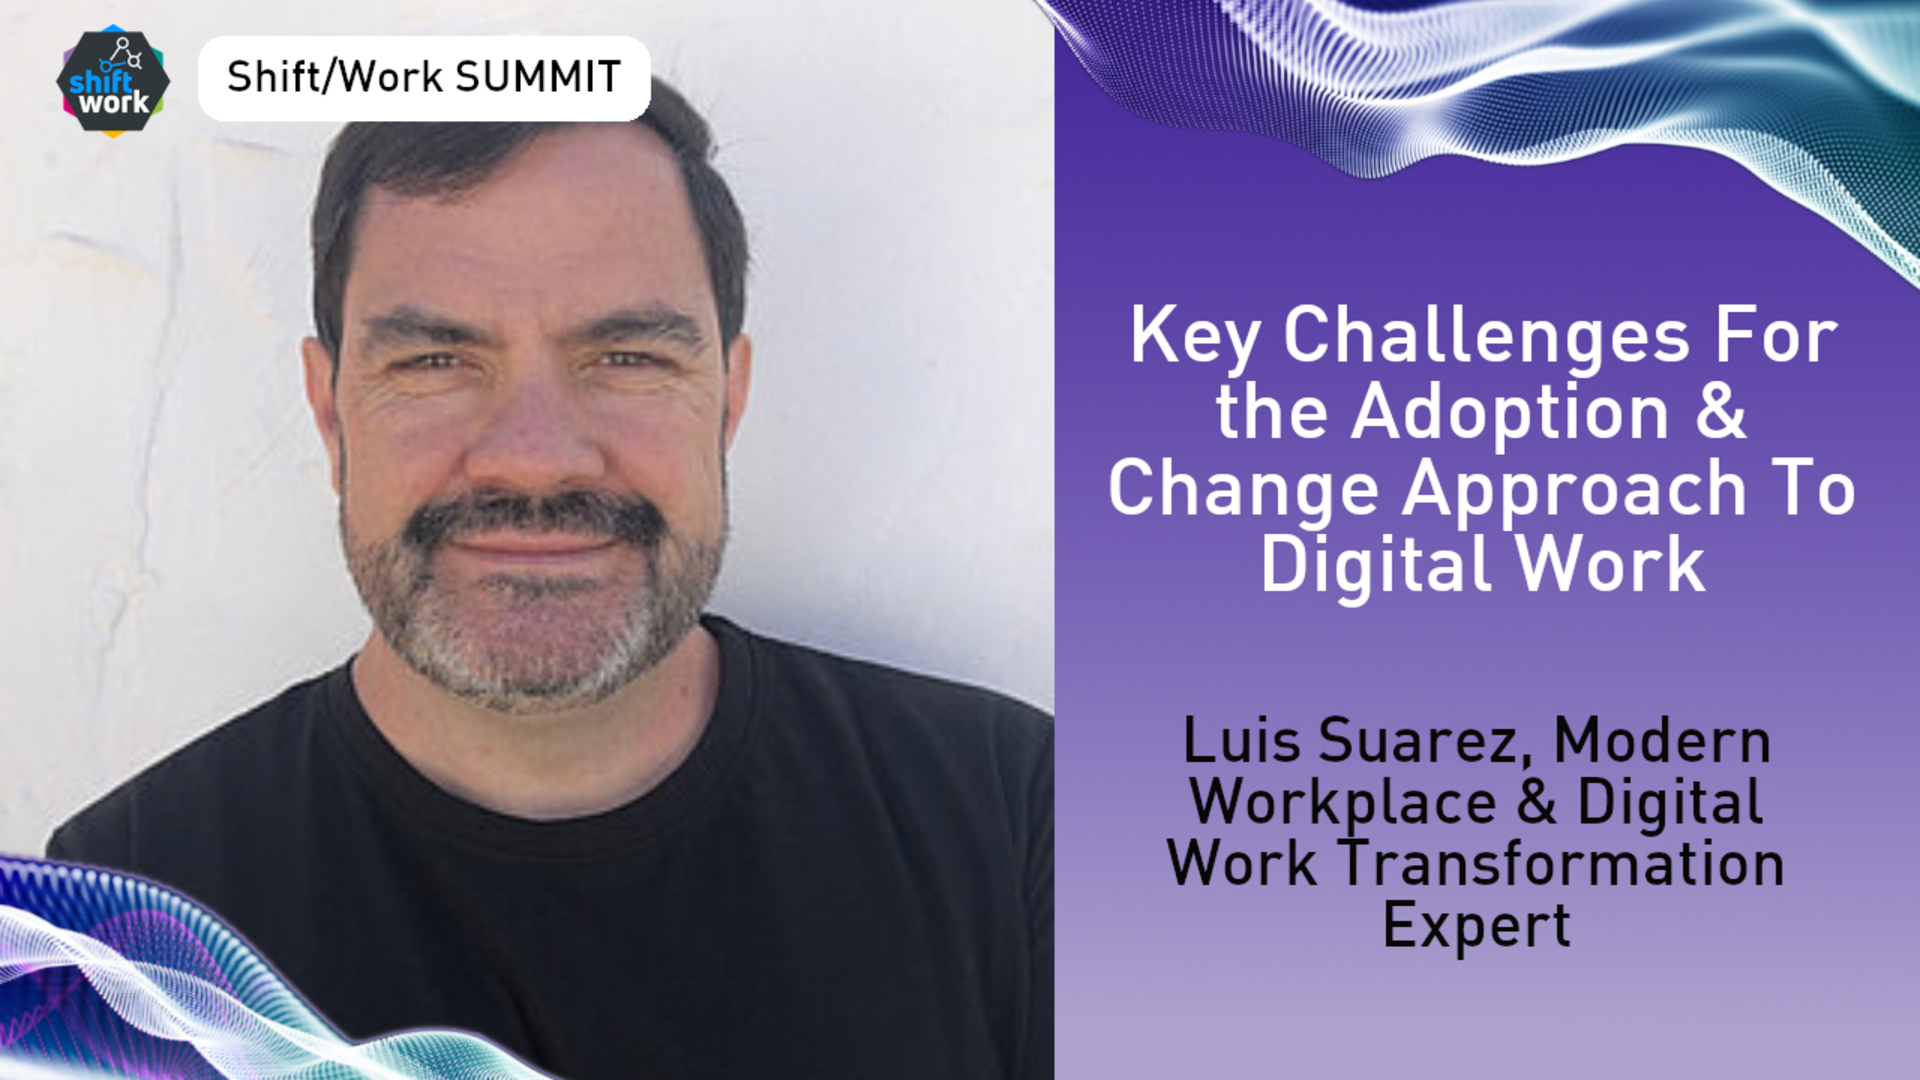 Key Challenges For the Adoption & Change Approach To Digital Work